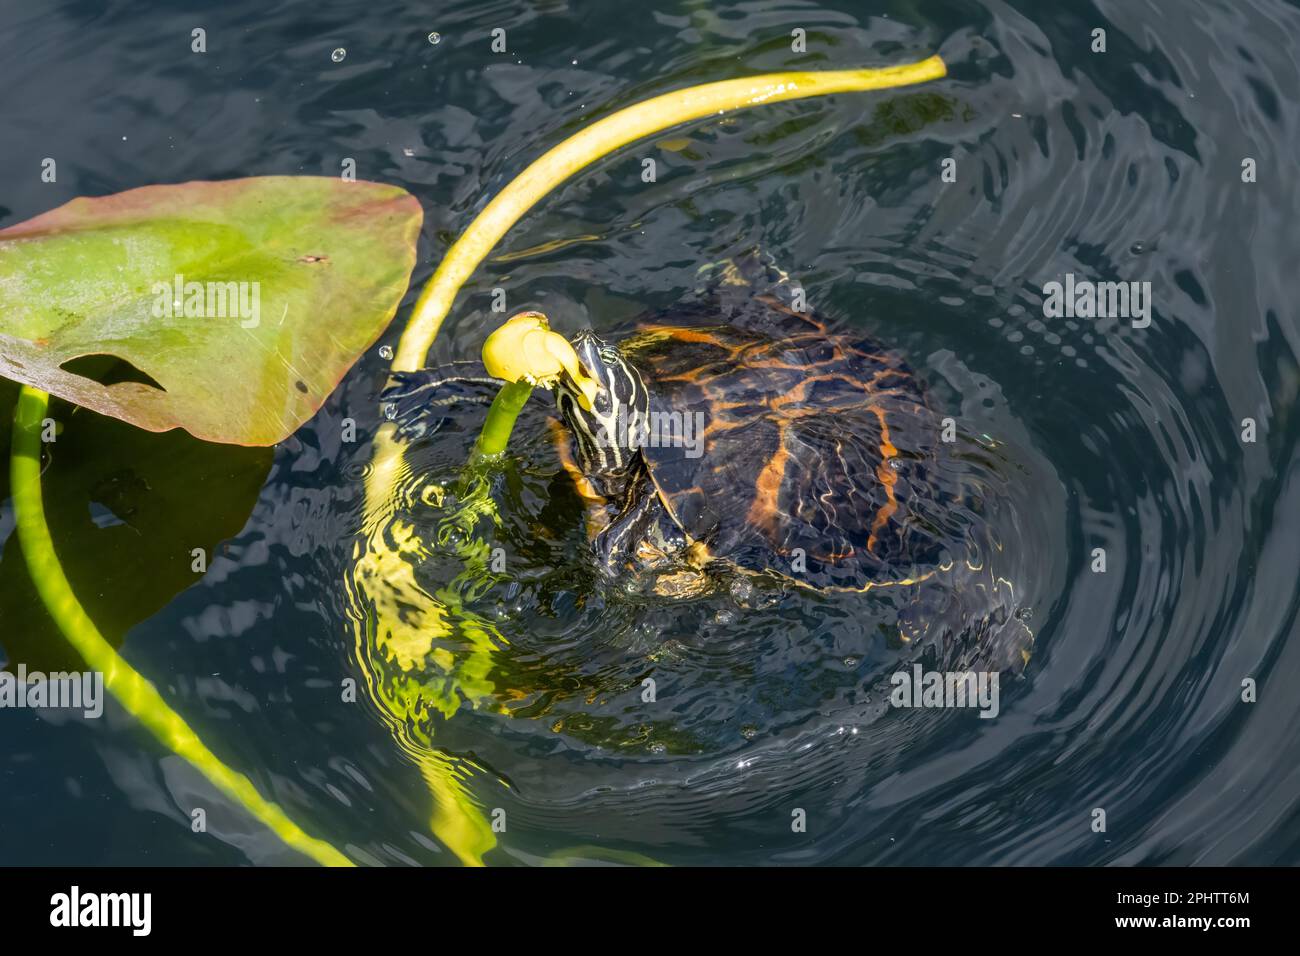 Florida Redbelly Turtle - Pseudemys nelsoni - eating water lily on Anhinga Trail in Everglades National Park, Florida. Stock Photo